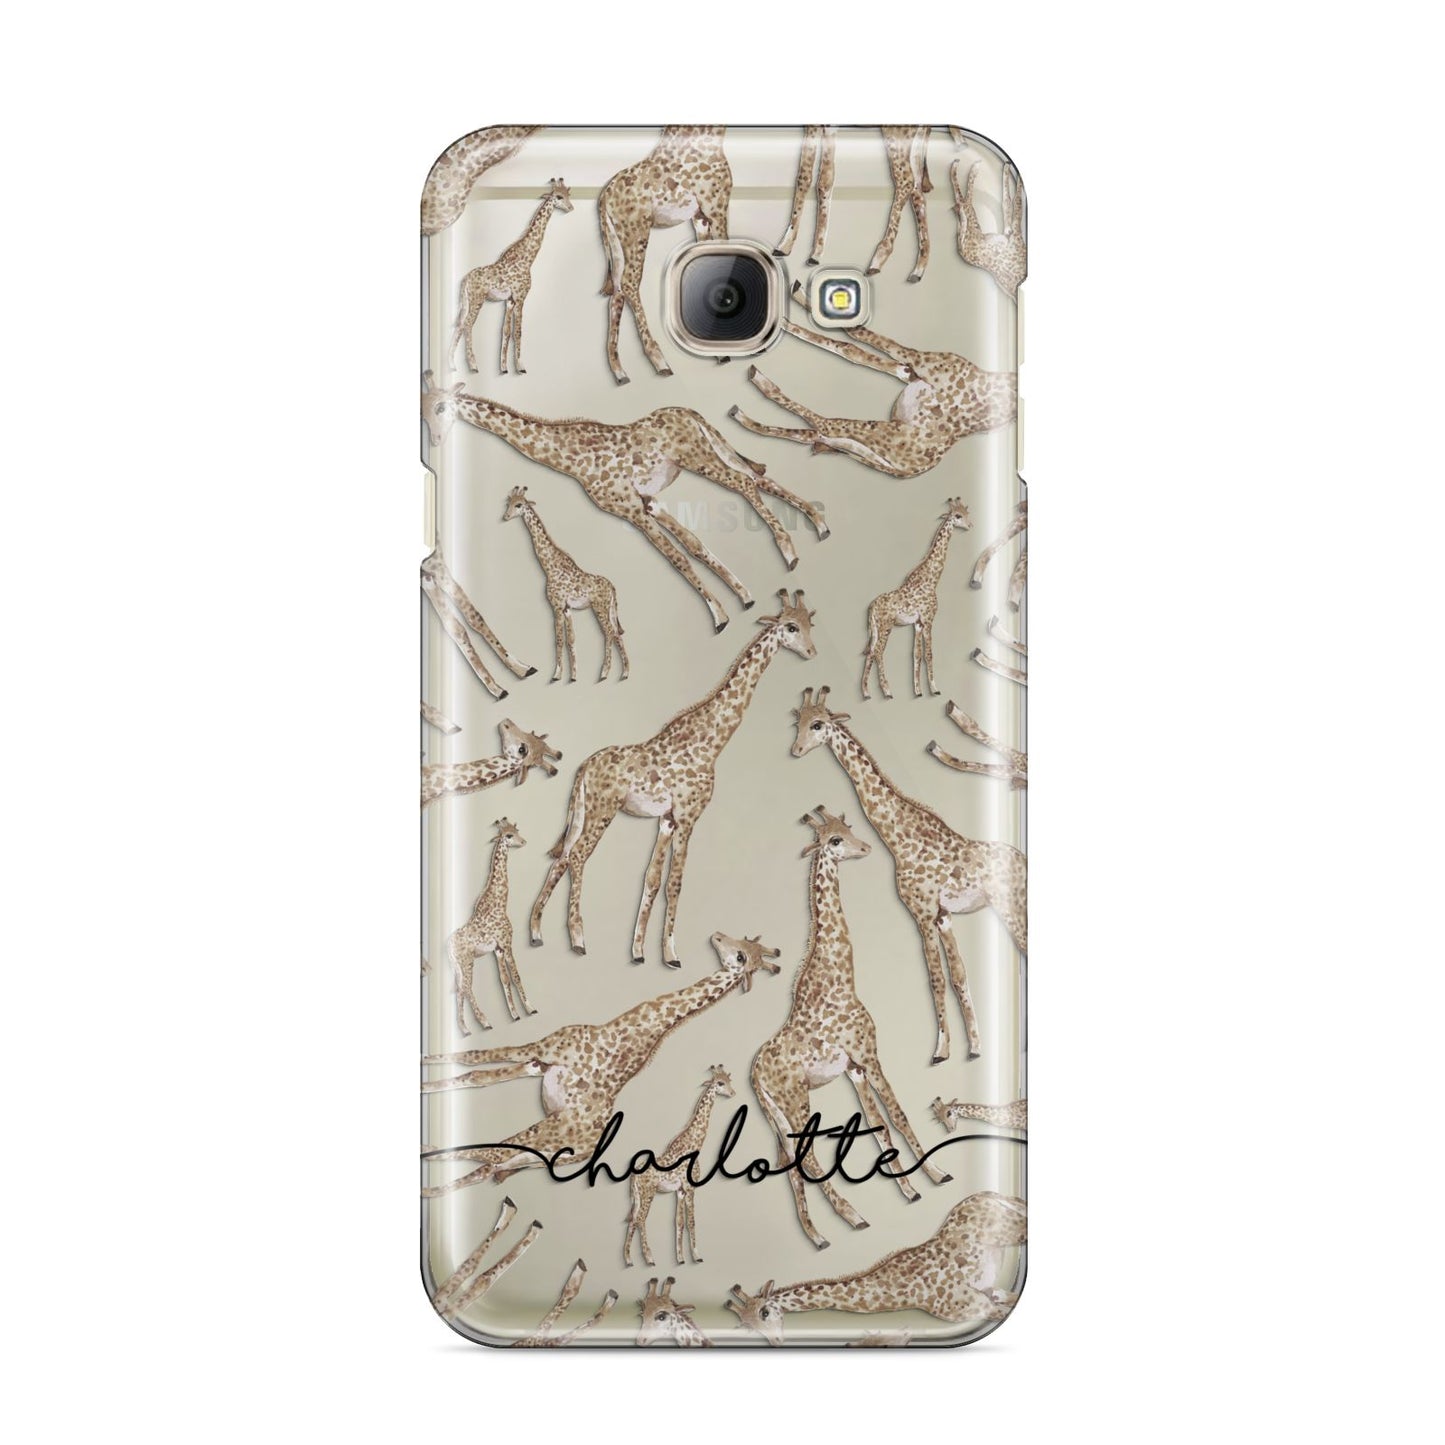 Personalised Giraffes with Name Samsung Galaxy A8 2016 Case